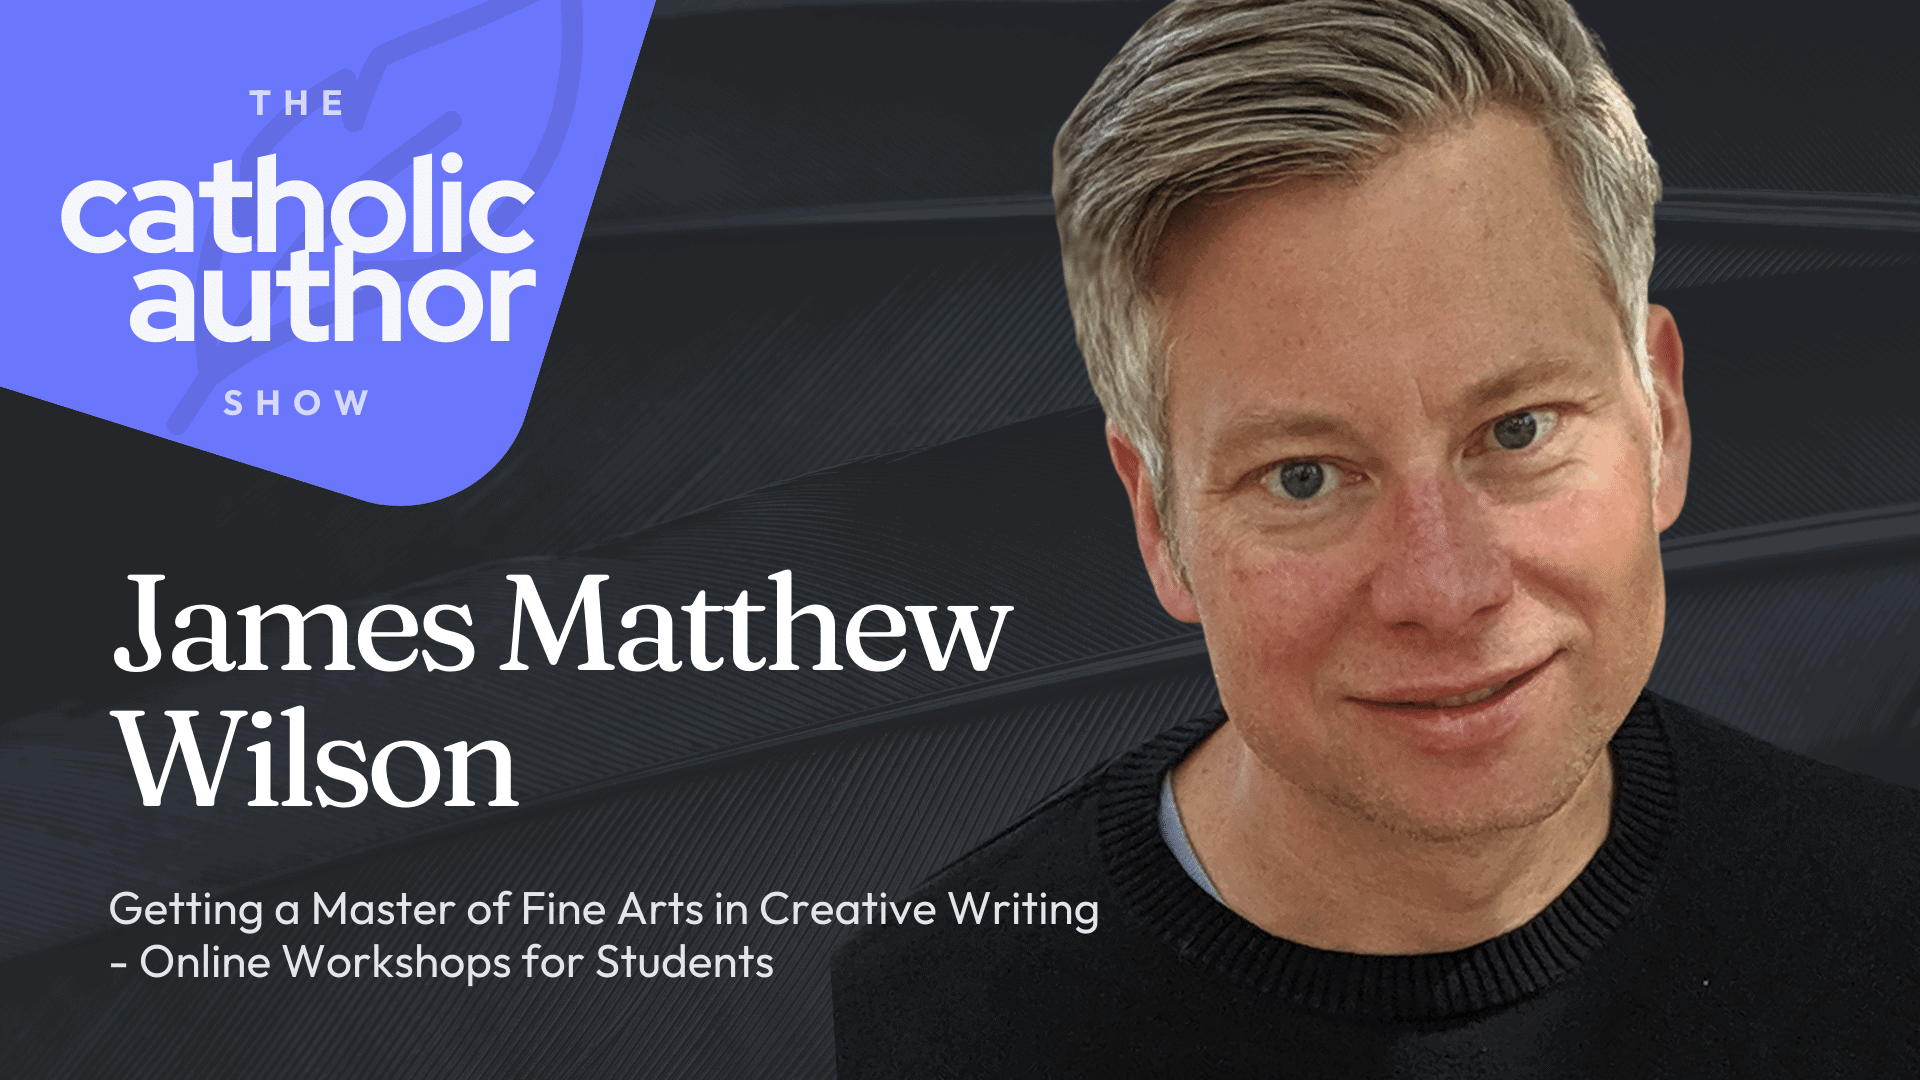 Want a Master of Fine Arts in Creative Writing? Online Workshops for Students | James Matthew Wilson